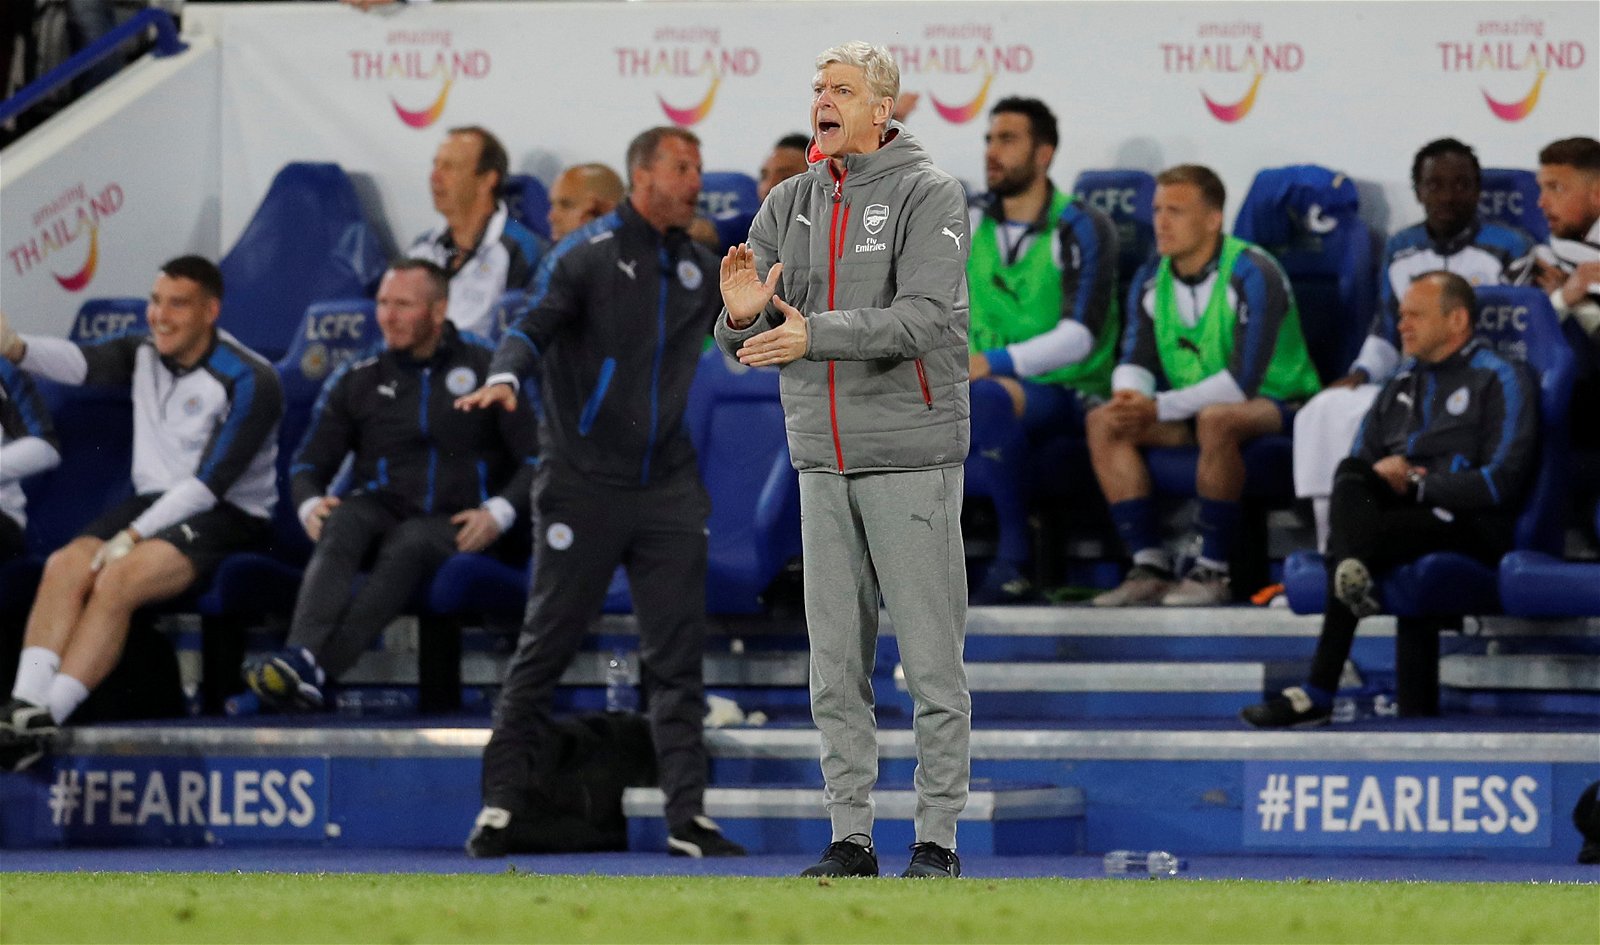 Arsenal legend makes an astonishing claim about Wenger and Chelsea